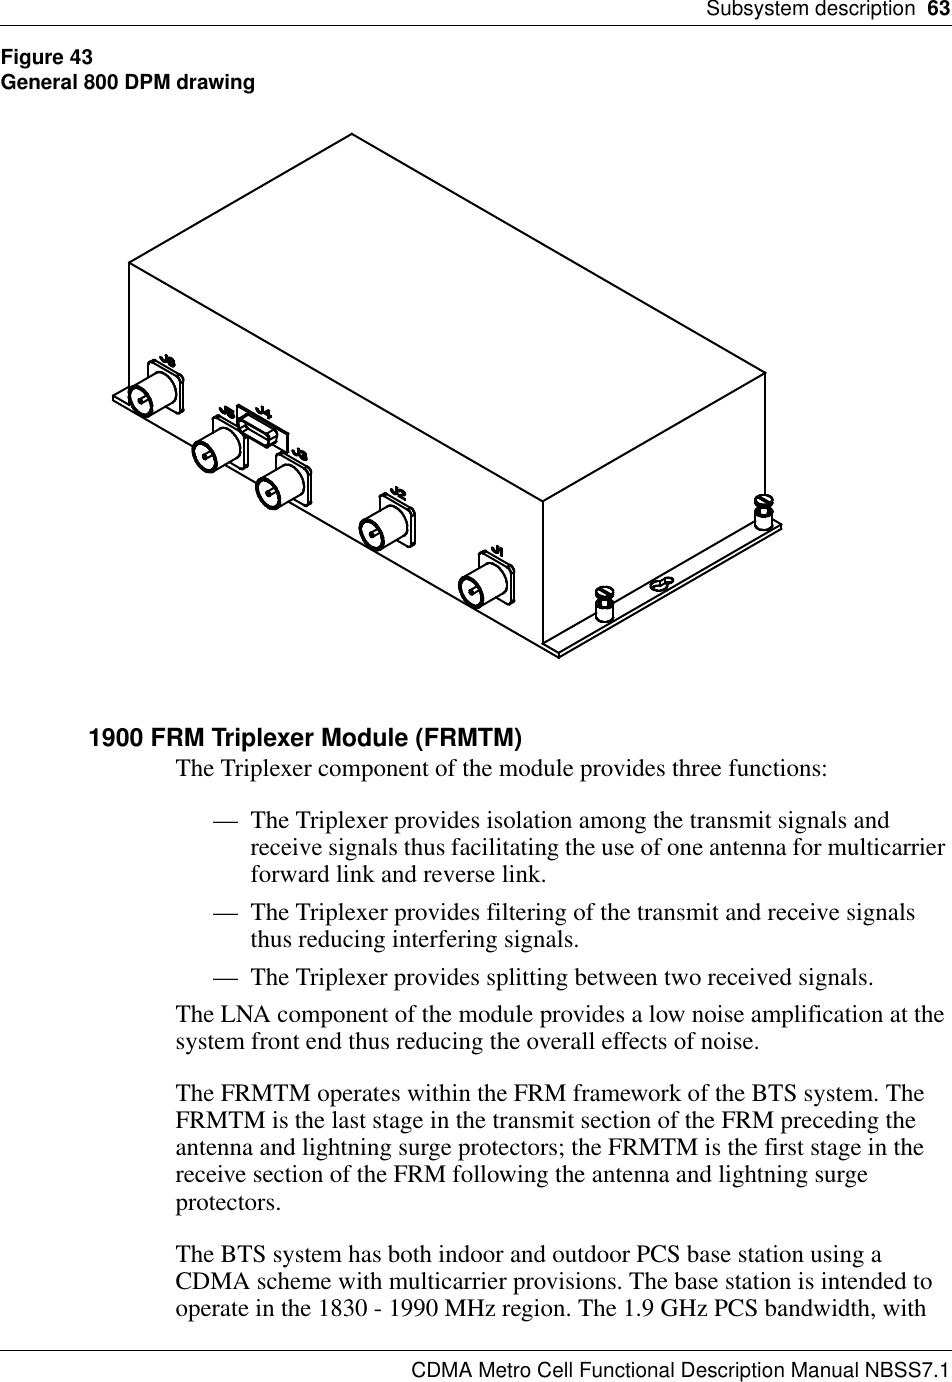 Subsystem description  63CDMA Metro Cell Functional Description Manual NBSS7.1Figure 43General 800 DPM drawing1900 FRM Triplexer Module (FRMTM)The Triplexer component of the module provides three functions:— The Triplexer provides isolation among the transmit signals and receive signals thus facilitating the use of one antenna for multicarrier forward link and reverse link.— The Triplexer provides filtering of the transmit and receive signals thus reducing interfering signals.— The Triplexer provides splitting between two received signals.The LNA component of the module provides a low noise amplification at the system front end thus reducing the overall effects of noise.The FRMTM operates within the FRM framework of the BTS system. The FRMTM is the last stage in the transmit section of the FRM preceding the antenna and lightning surge protectors; the FRMTM is the first stage in the receive section of the FRM following the antenna and lightning surge protectors.The BTS system has both indoor and outdoor PCS base station using a CDMA scheme with multicarrier provisions. The base station is intended to operate in the 1830 - 1990 MHz region. The 1.9 GHz PCS bandwidth, with 